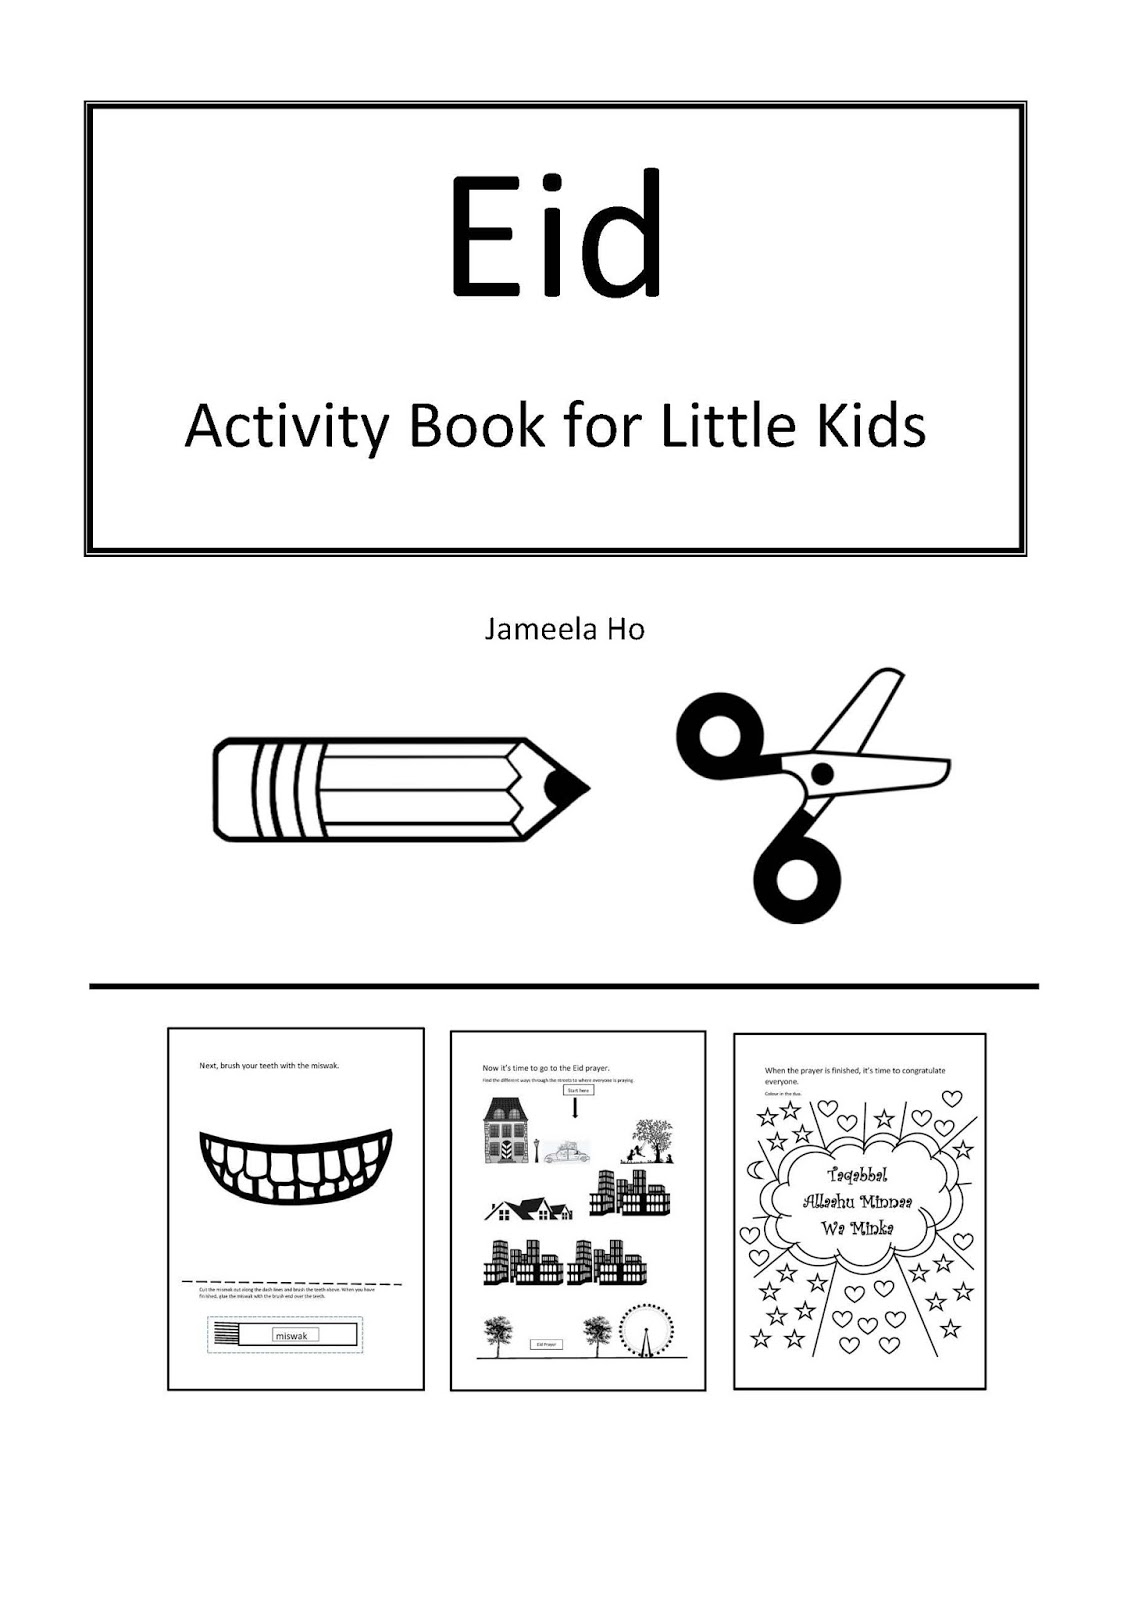 ILMA Education Free Download Eid Activity Book For Little Kids